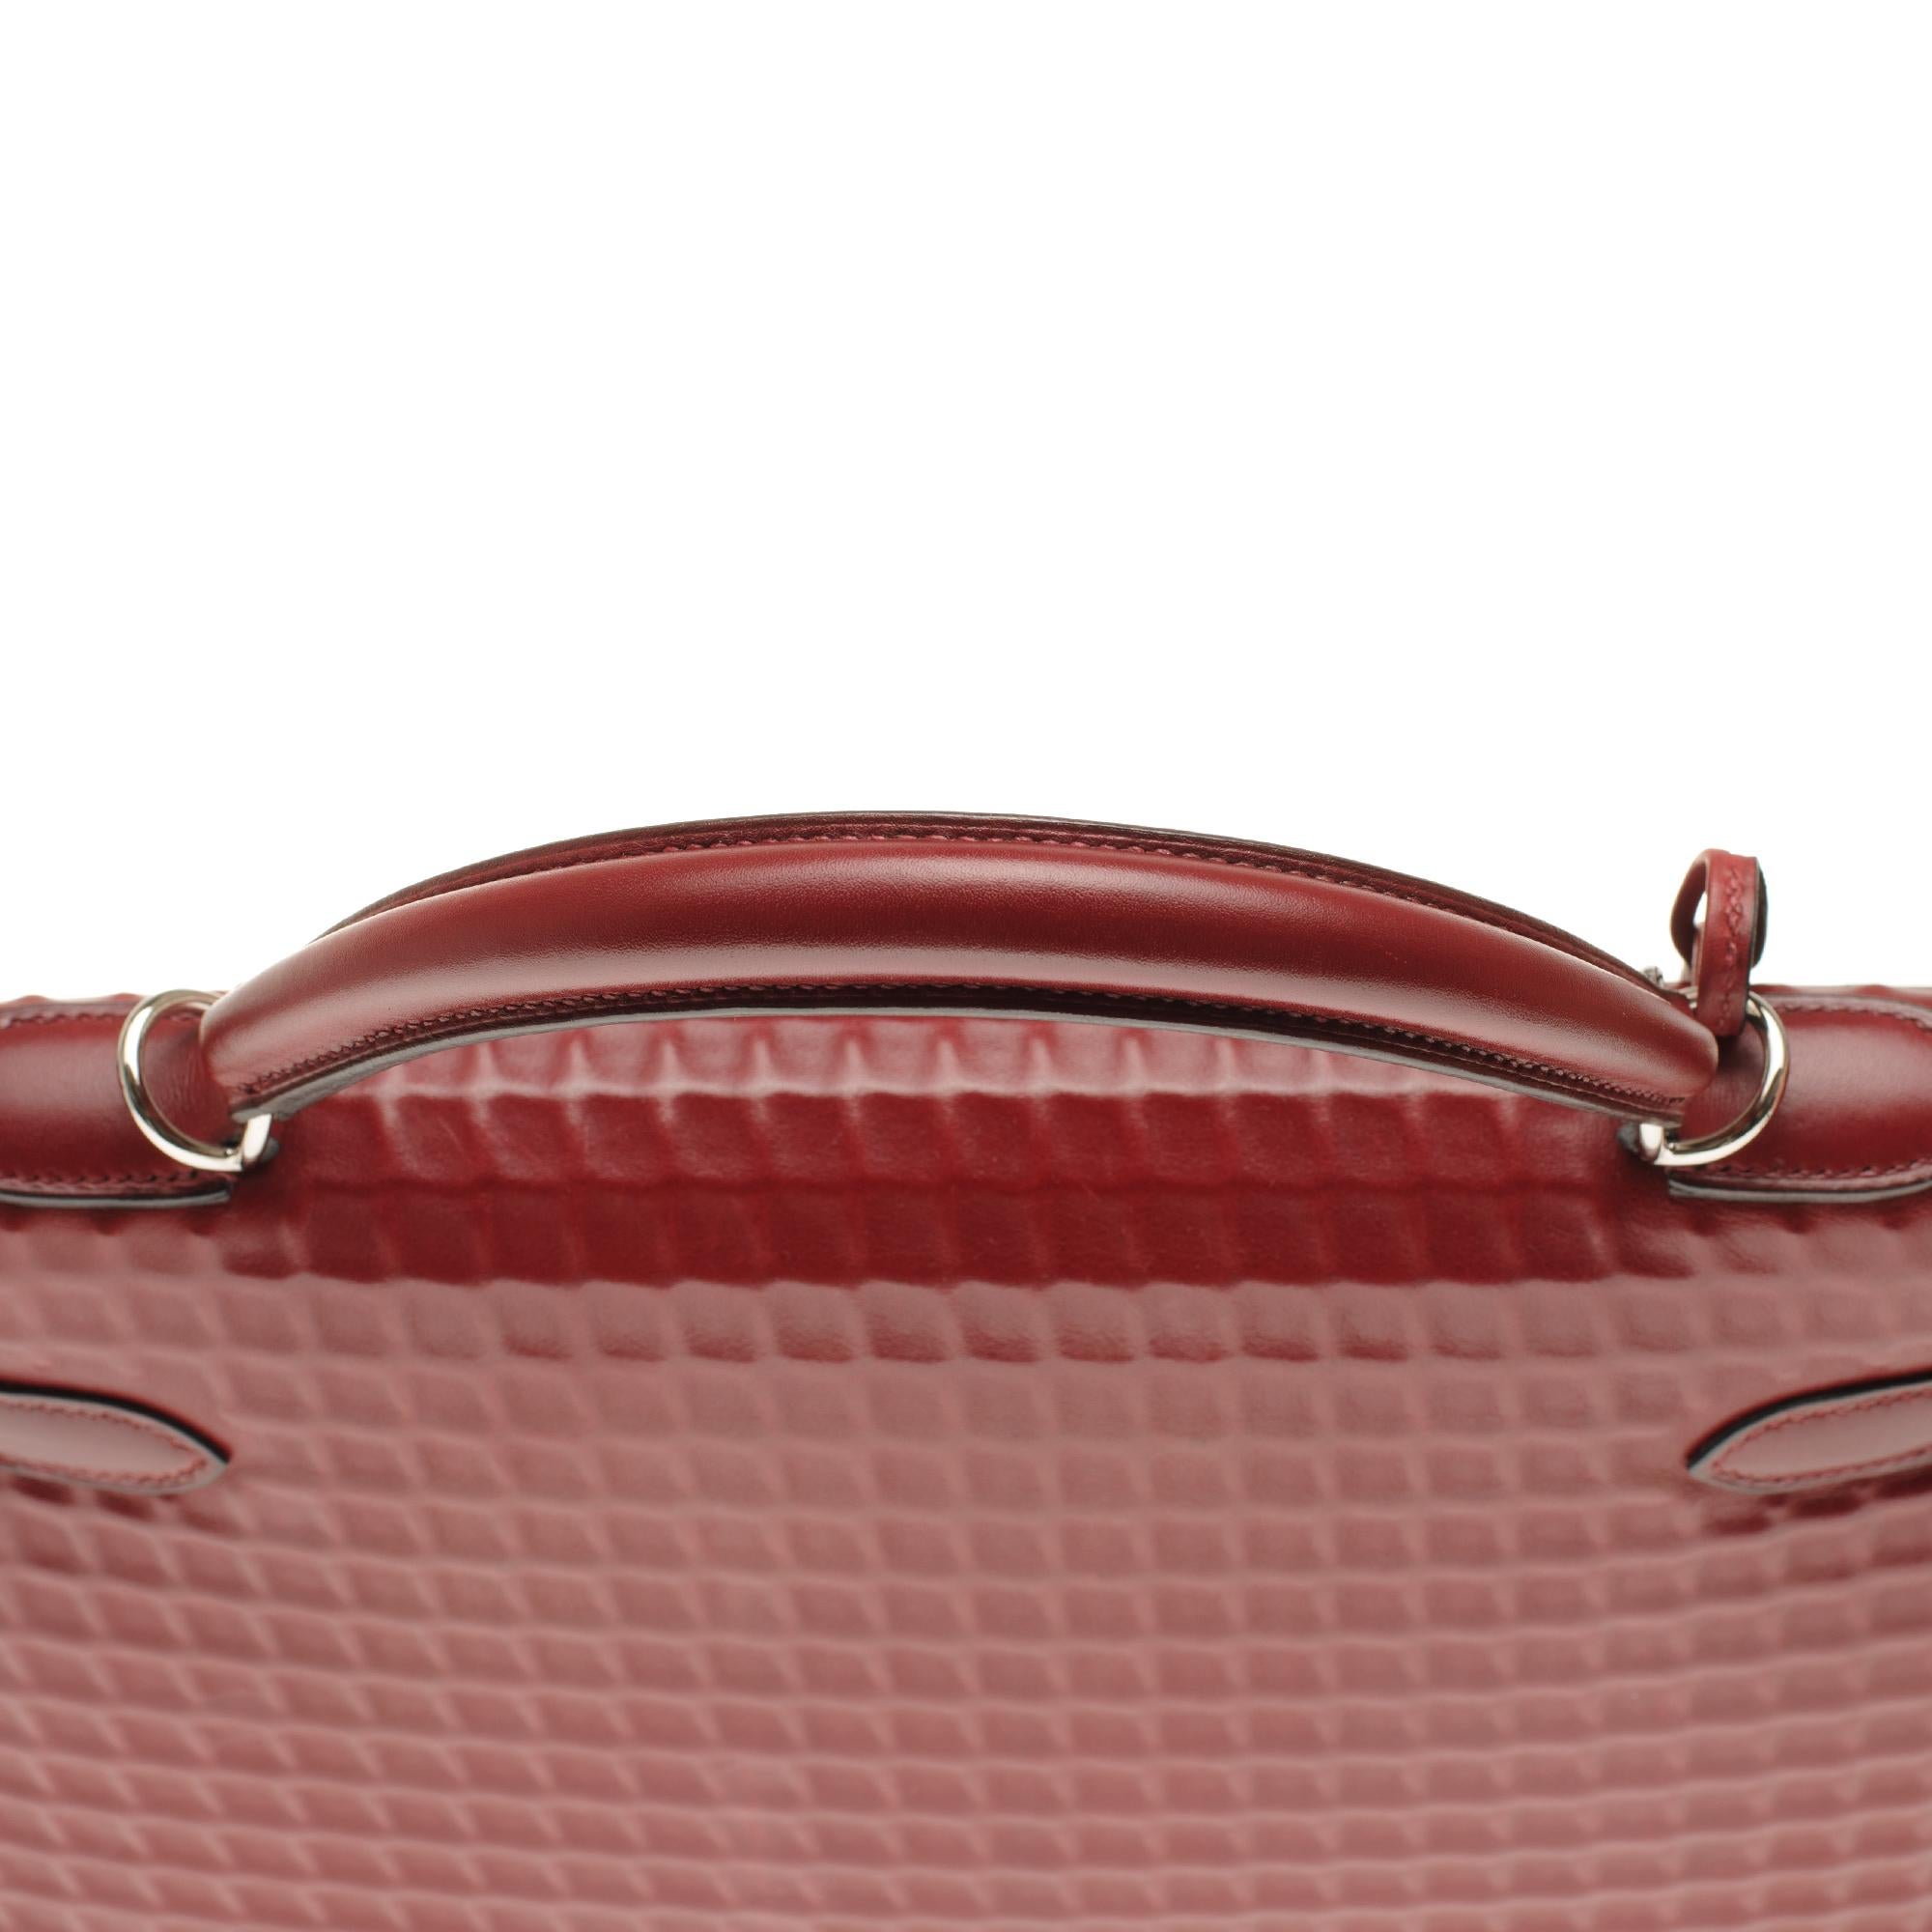 Women's ULTRA RARE-COLLECTIBLE-Hermès Kelly 32 Waffle with strap in rouge H Barenia, PHW